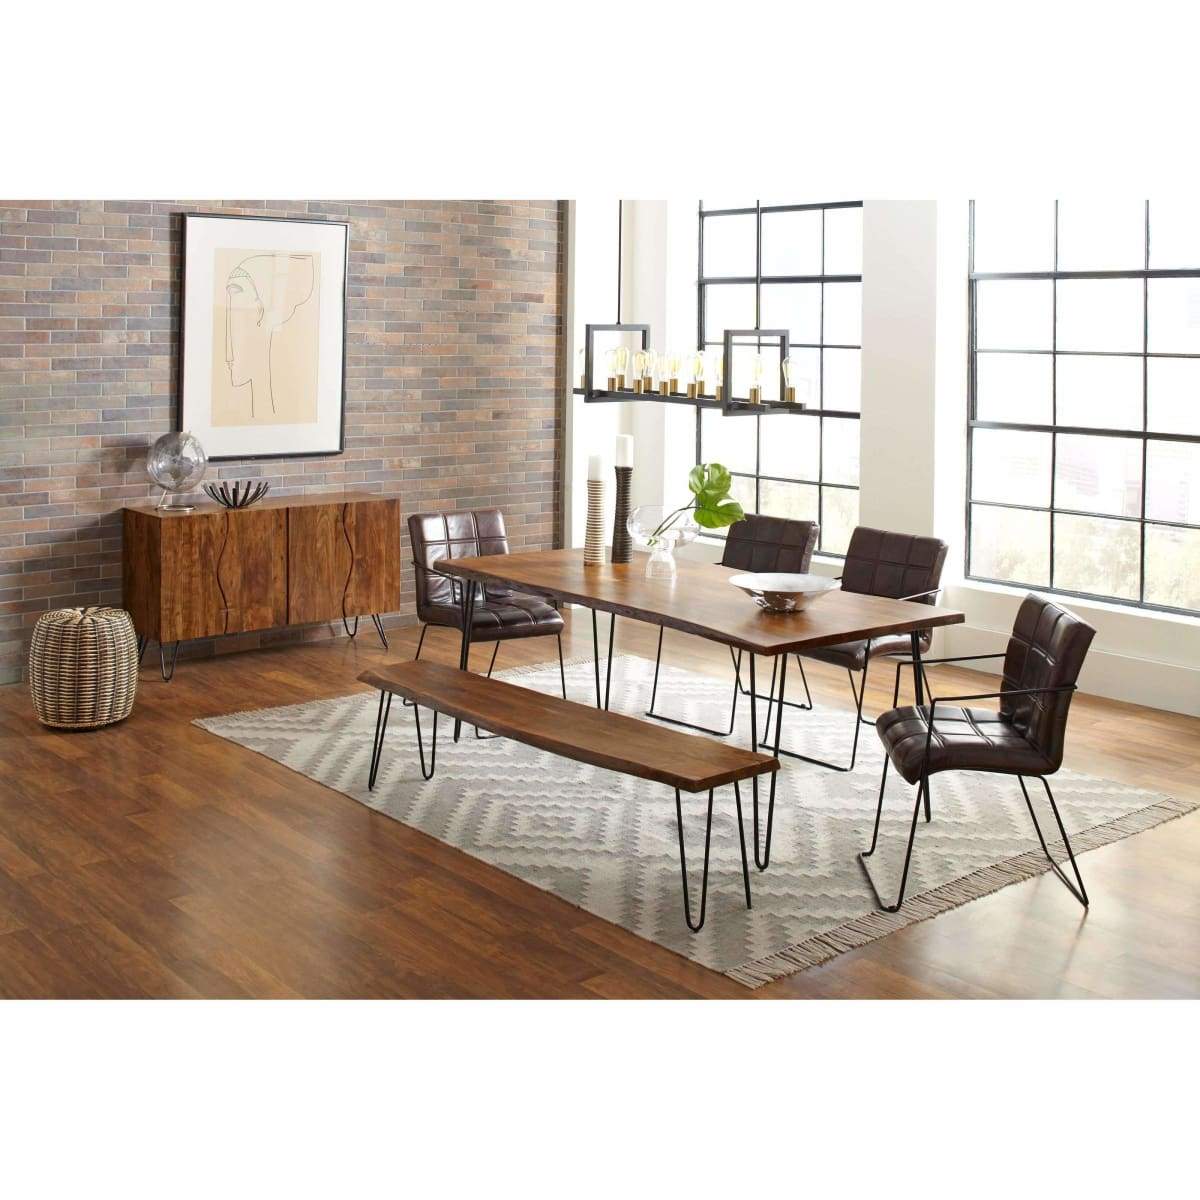 Natures Edge 79 Dining Table and Chair Set - DININGCOUNTERHEIGHT